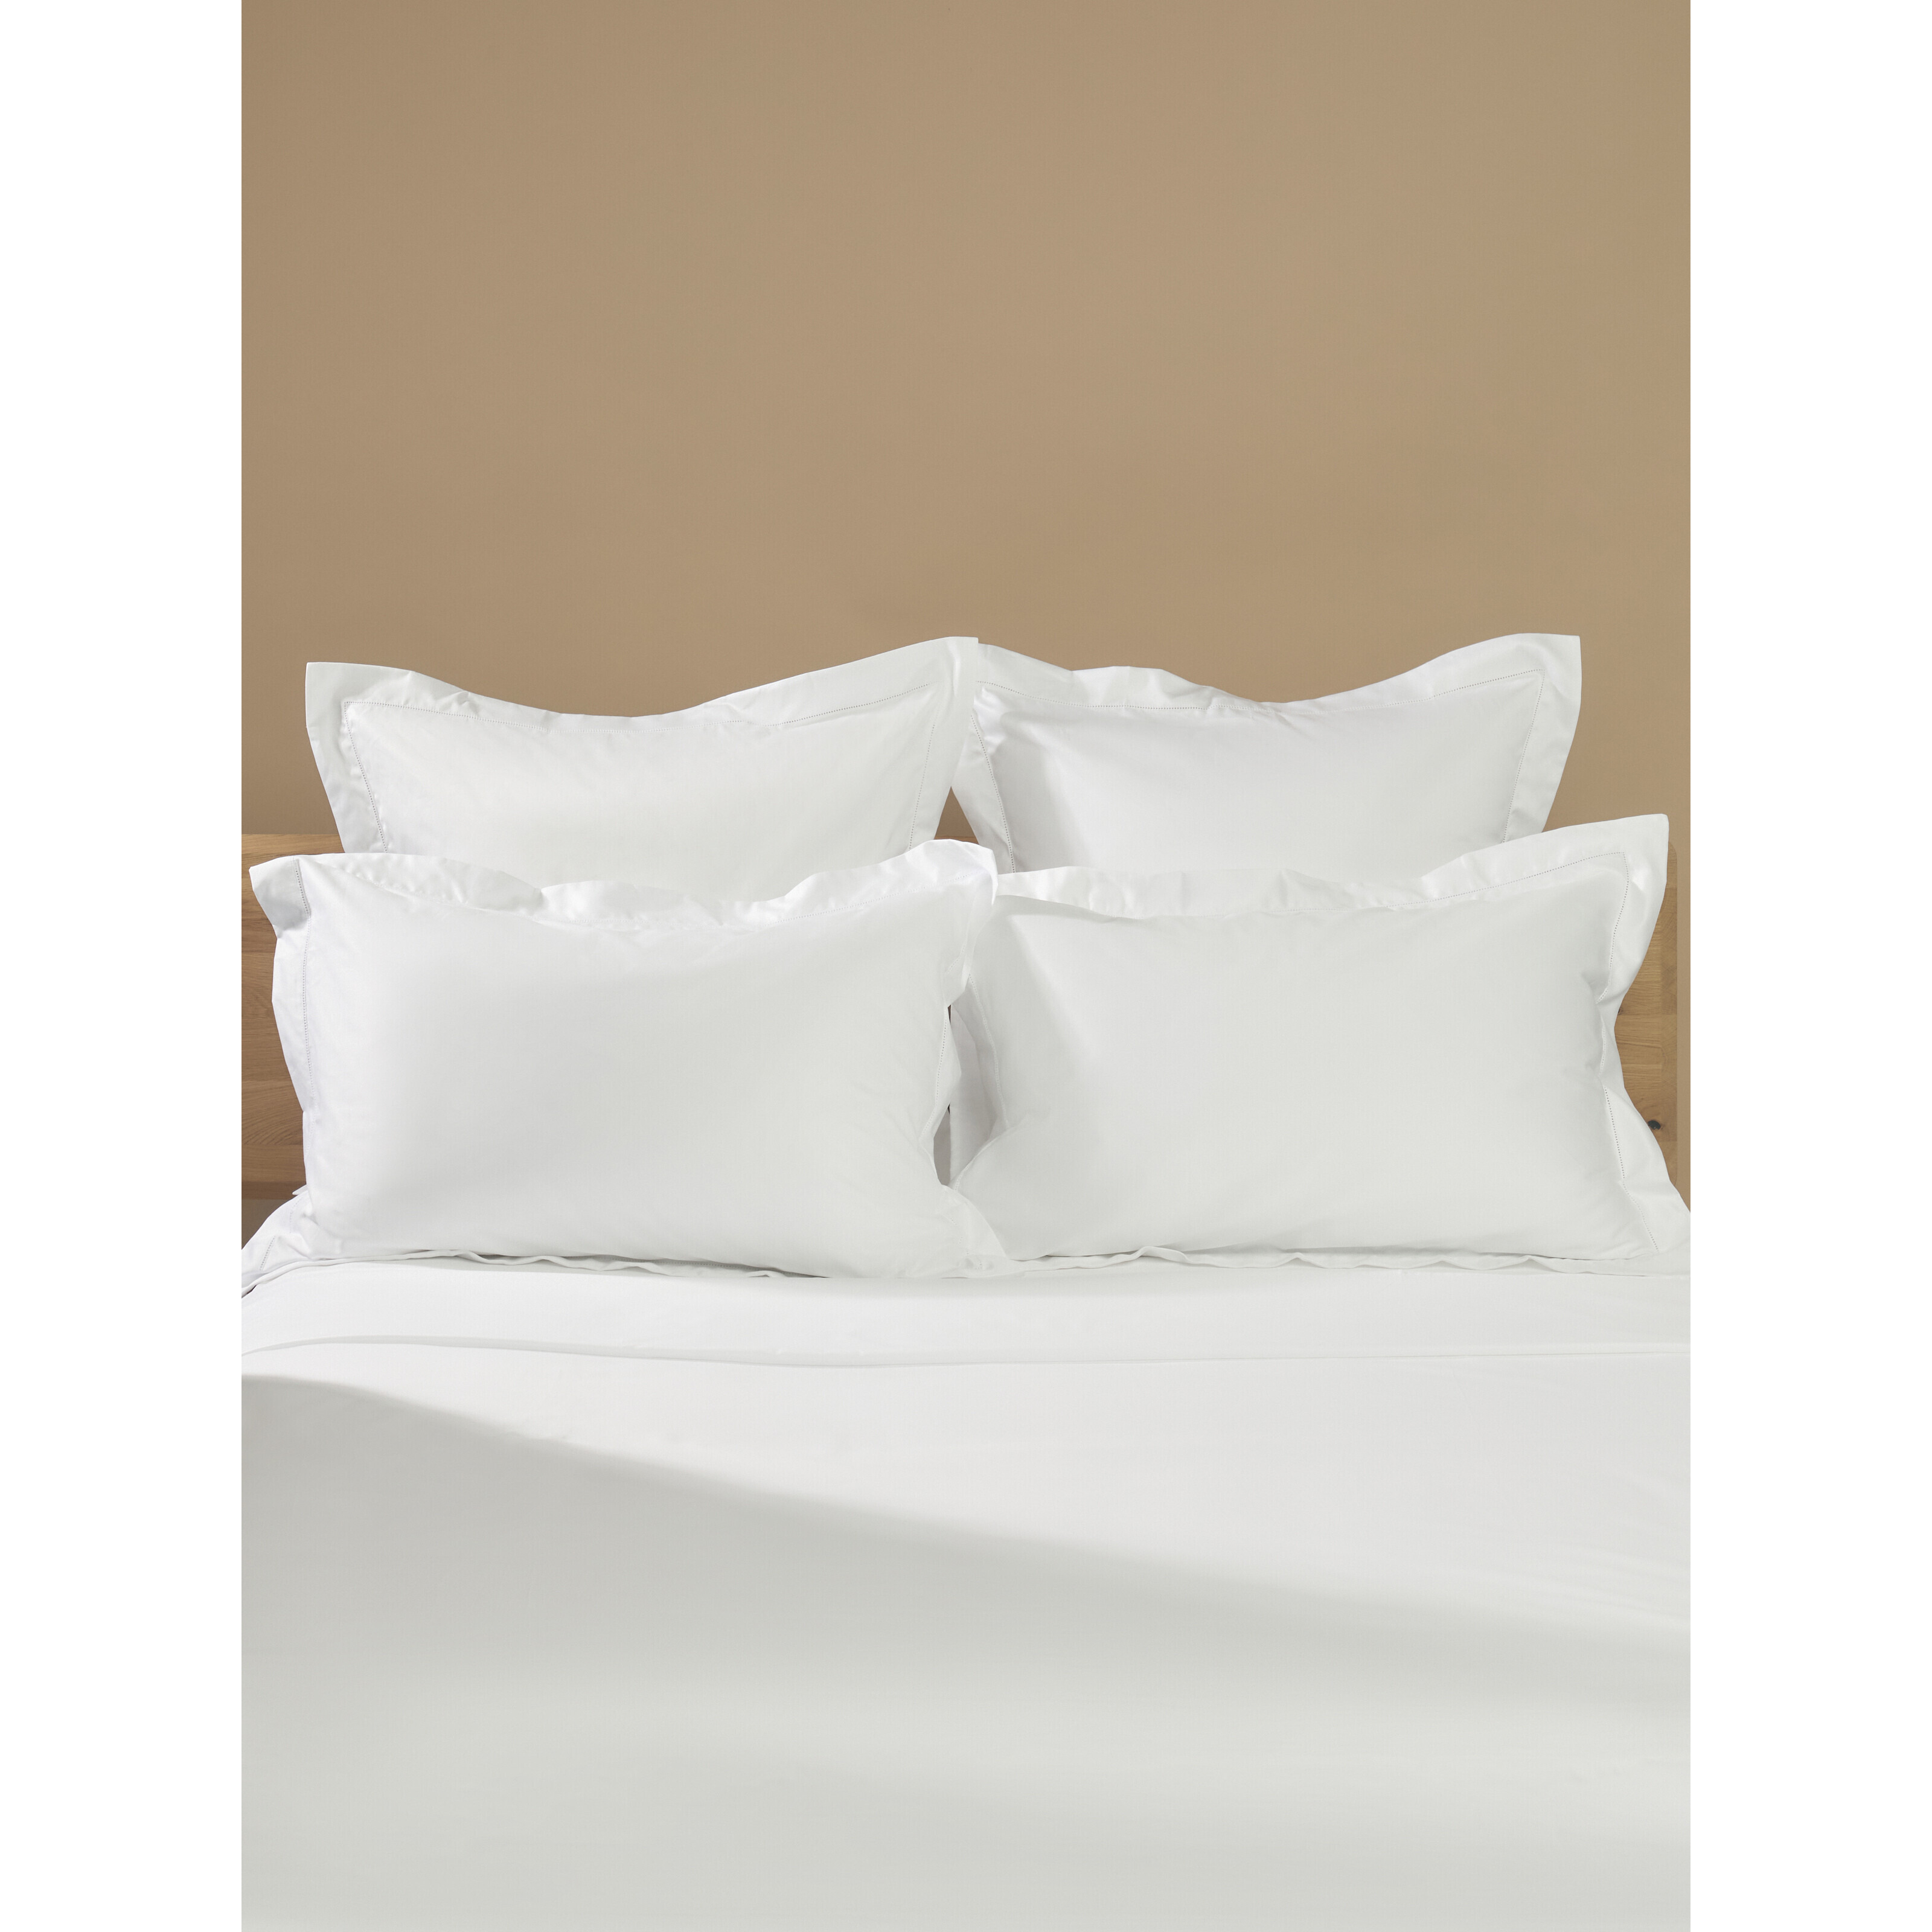 Fenwick at Home Mayfair Ultimate Egyptian Cotton Sateen Flat Sheet - Size King White - image 1